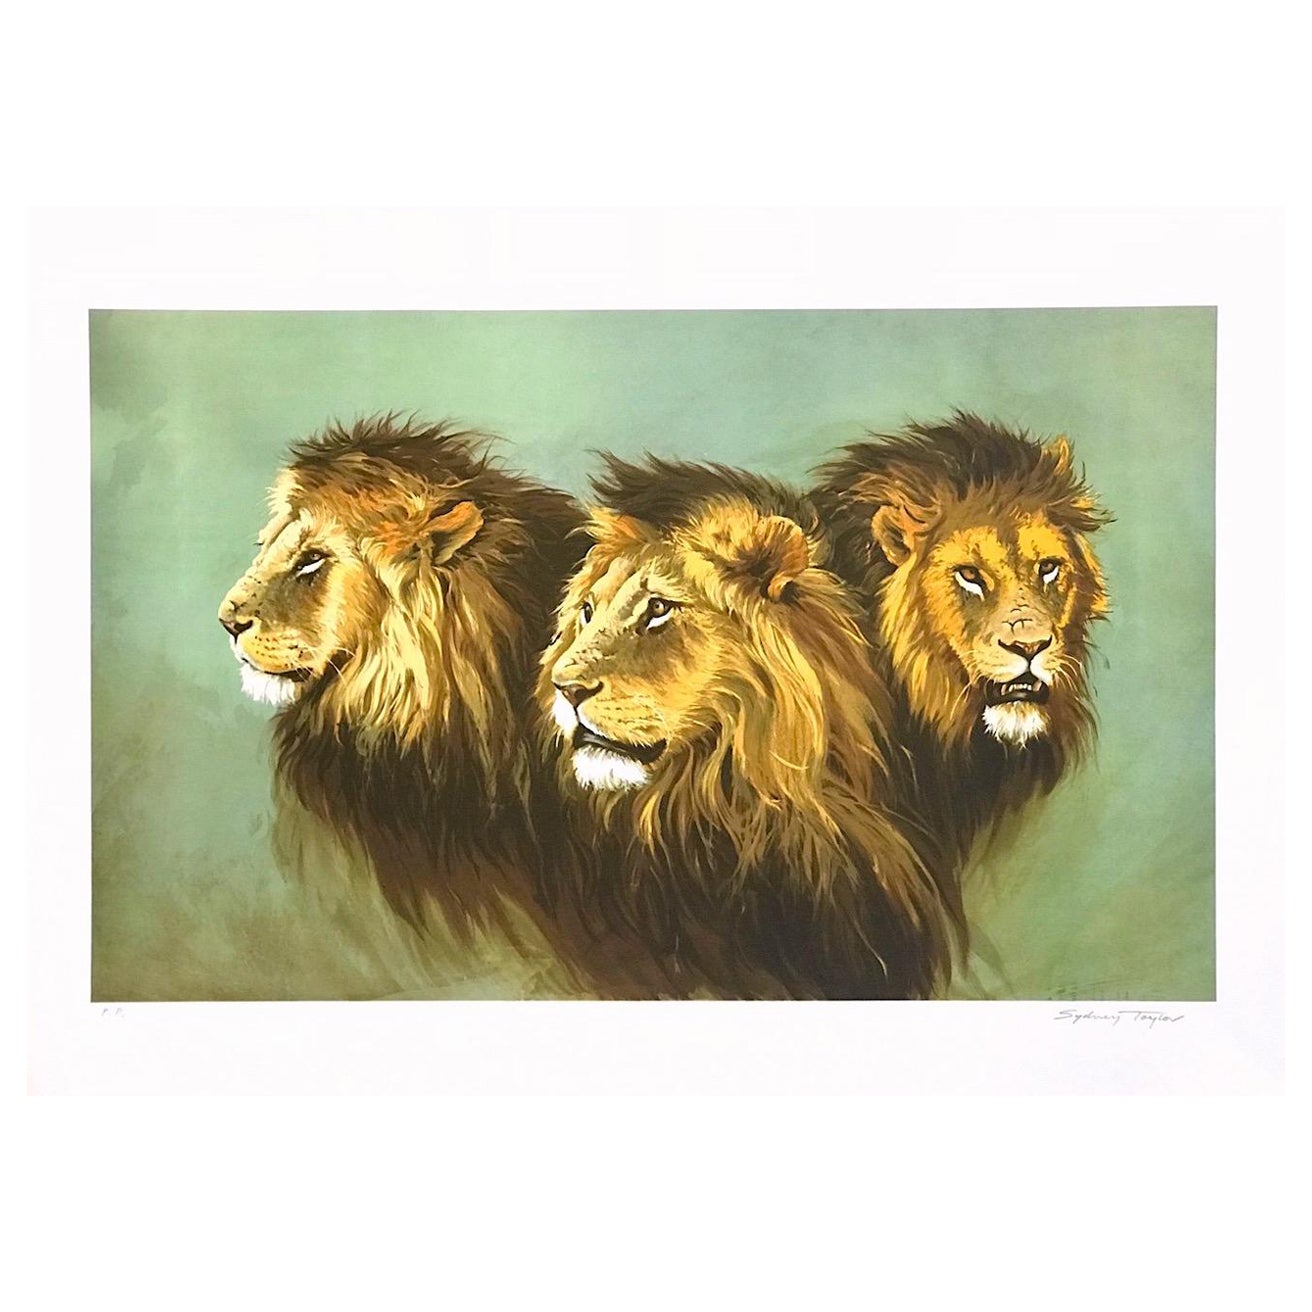 LION PORTRAIT Signed Lithograph, African Lion Heads, Modern Wildlife Art - Print by Sydney Taylor